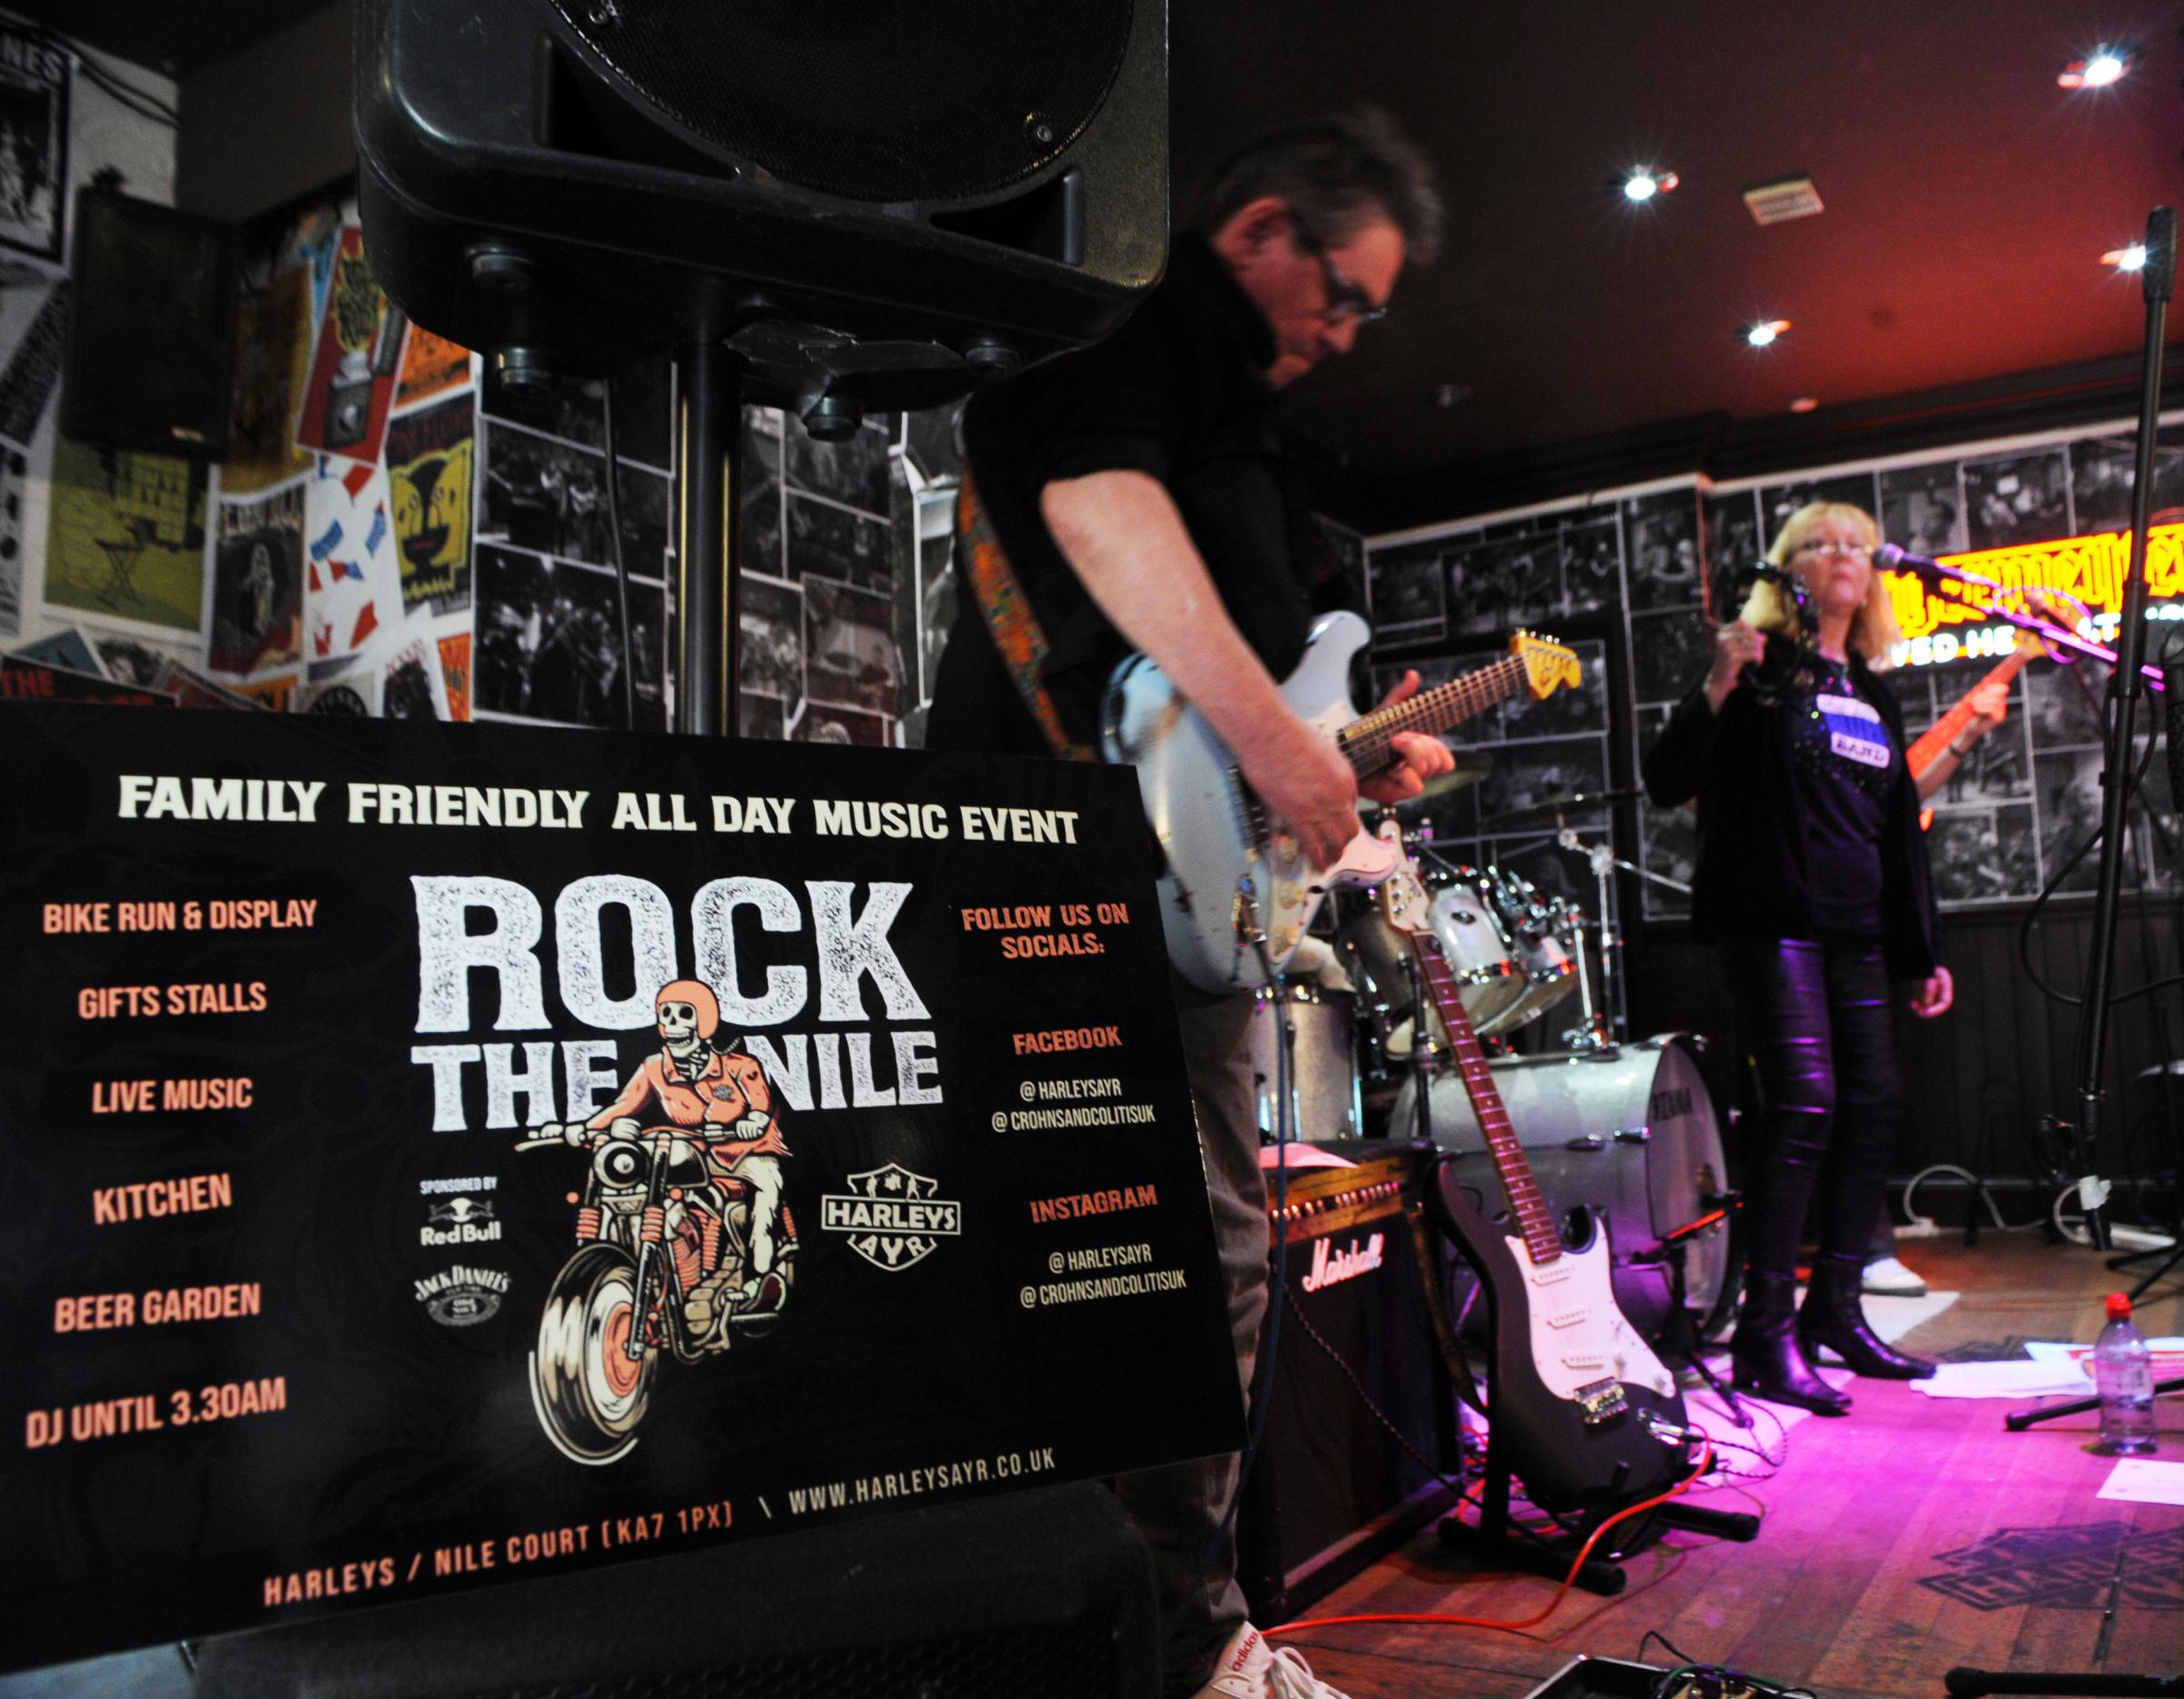 The Rock The Nile family fund-raiser gave a boost to the Crohns & Colitis UK charity (Image: Charlie GIlmour)